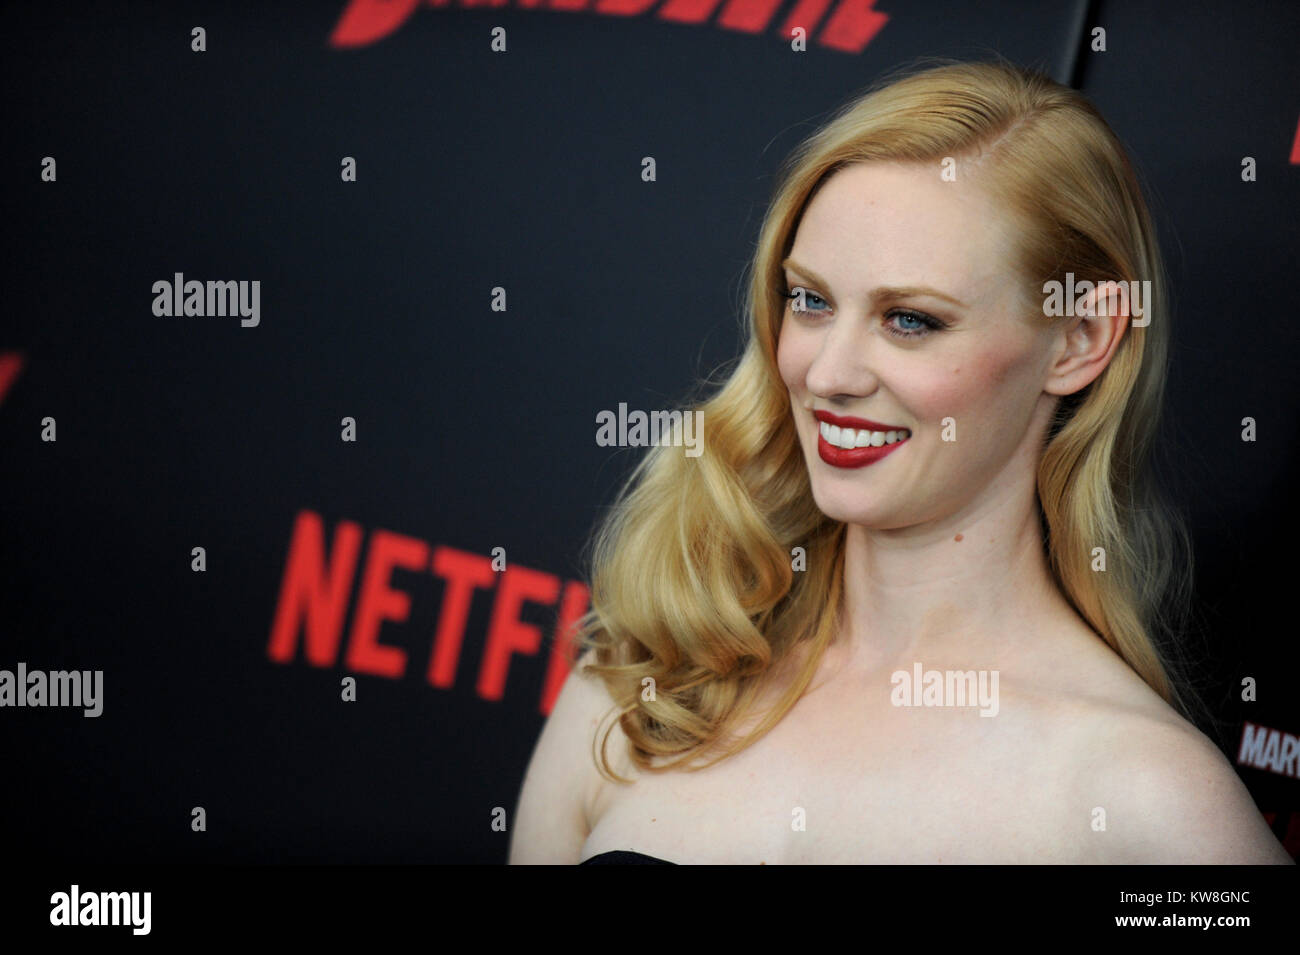 NEW YORK, NY - MARCH 10: Deborah Ann Woll attends the 'Daredevil' season 2 premiere at AMC Loews Lincoln Square 13 theater on March 10, 2016 in New York City.   People:  Deborah Ann Woll Stock Photo